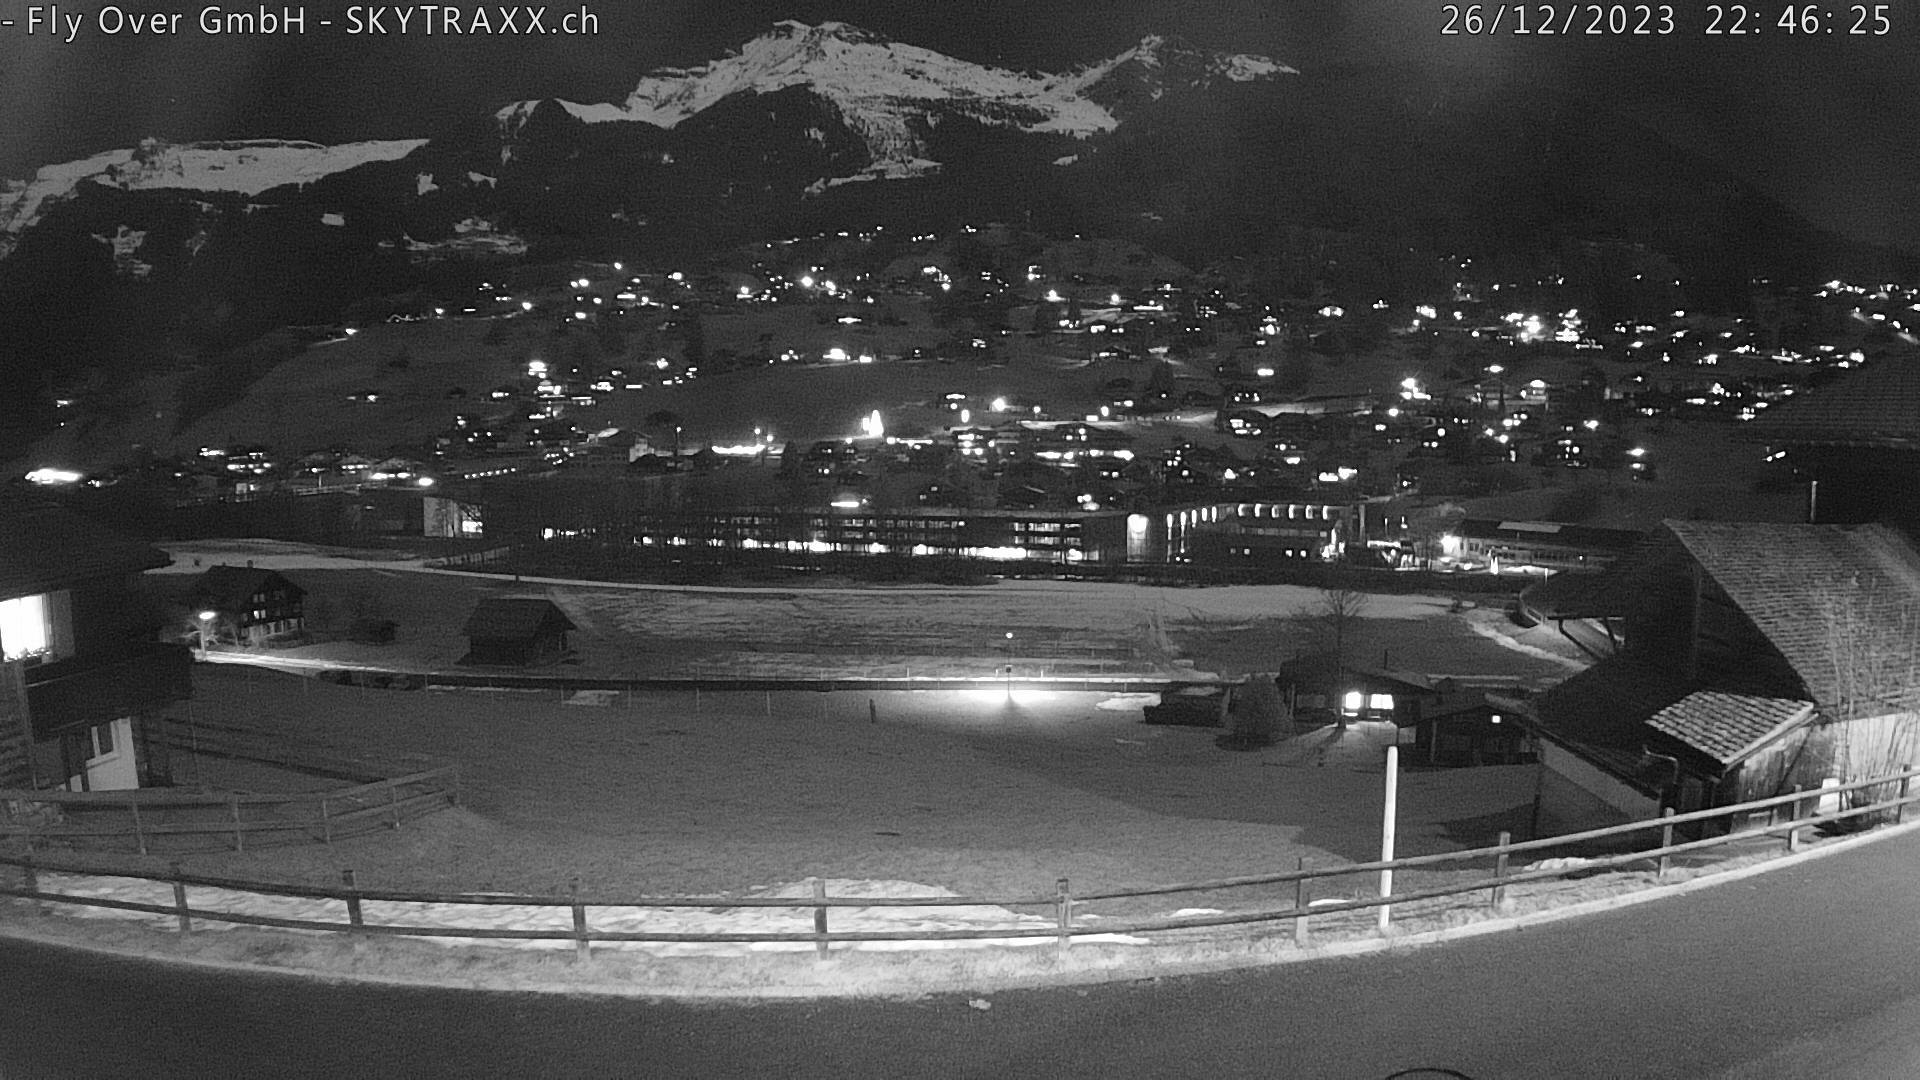 Webcam not available for Grindelwald